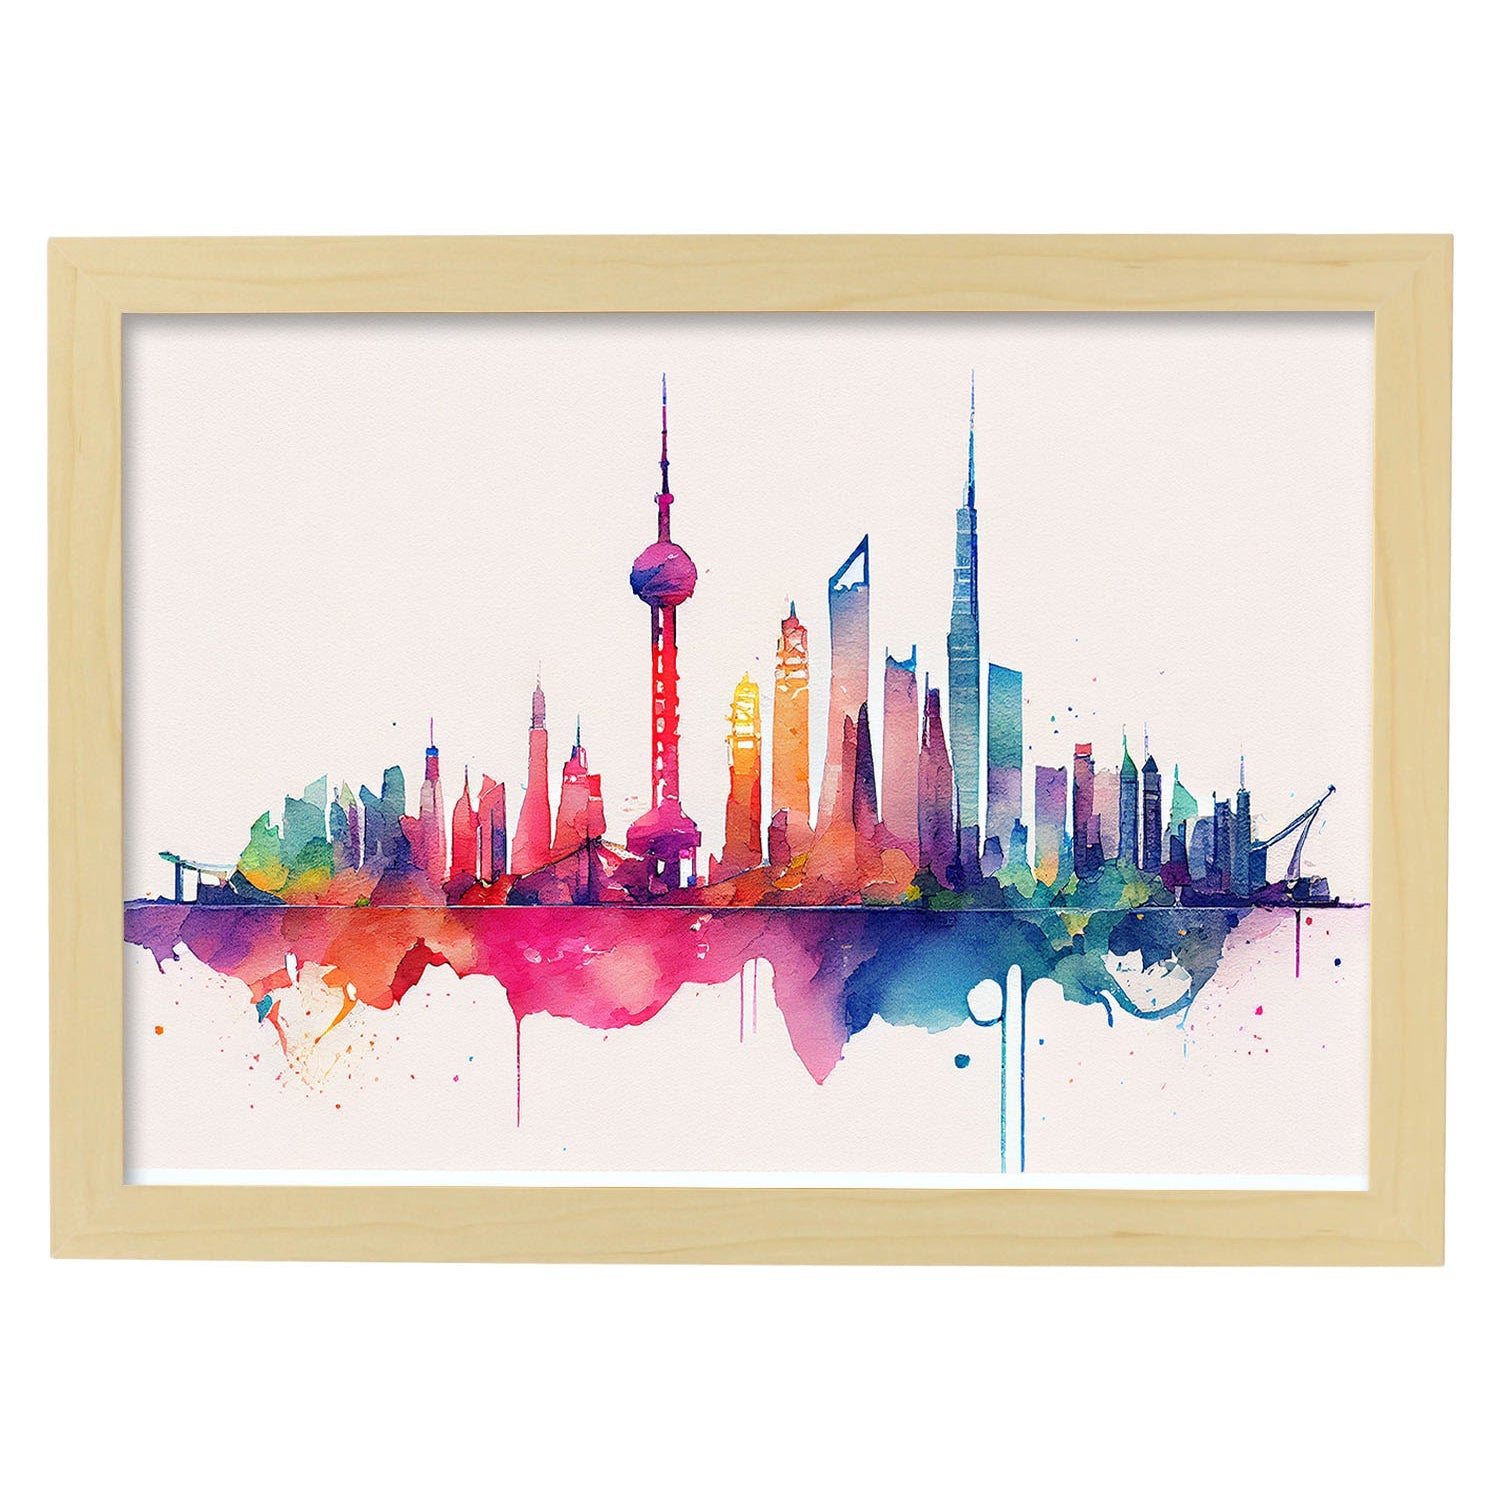 Nacnic watercolor of a skyline of the city of Shanghai_1. Aesthetic Wall Art Prints for Bedroom or Living Room Design.-Artwork-Nacnic-A4-Marco Madera Clara-Nacnic Estudio SL